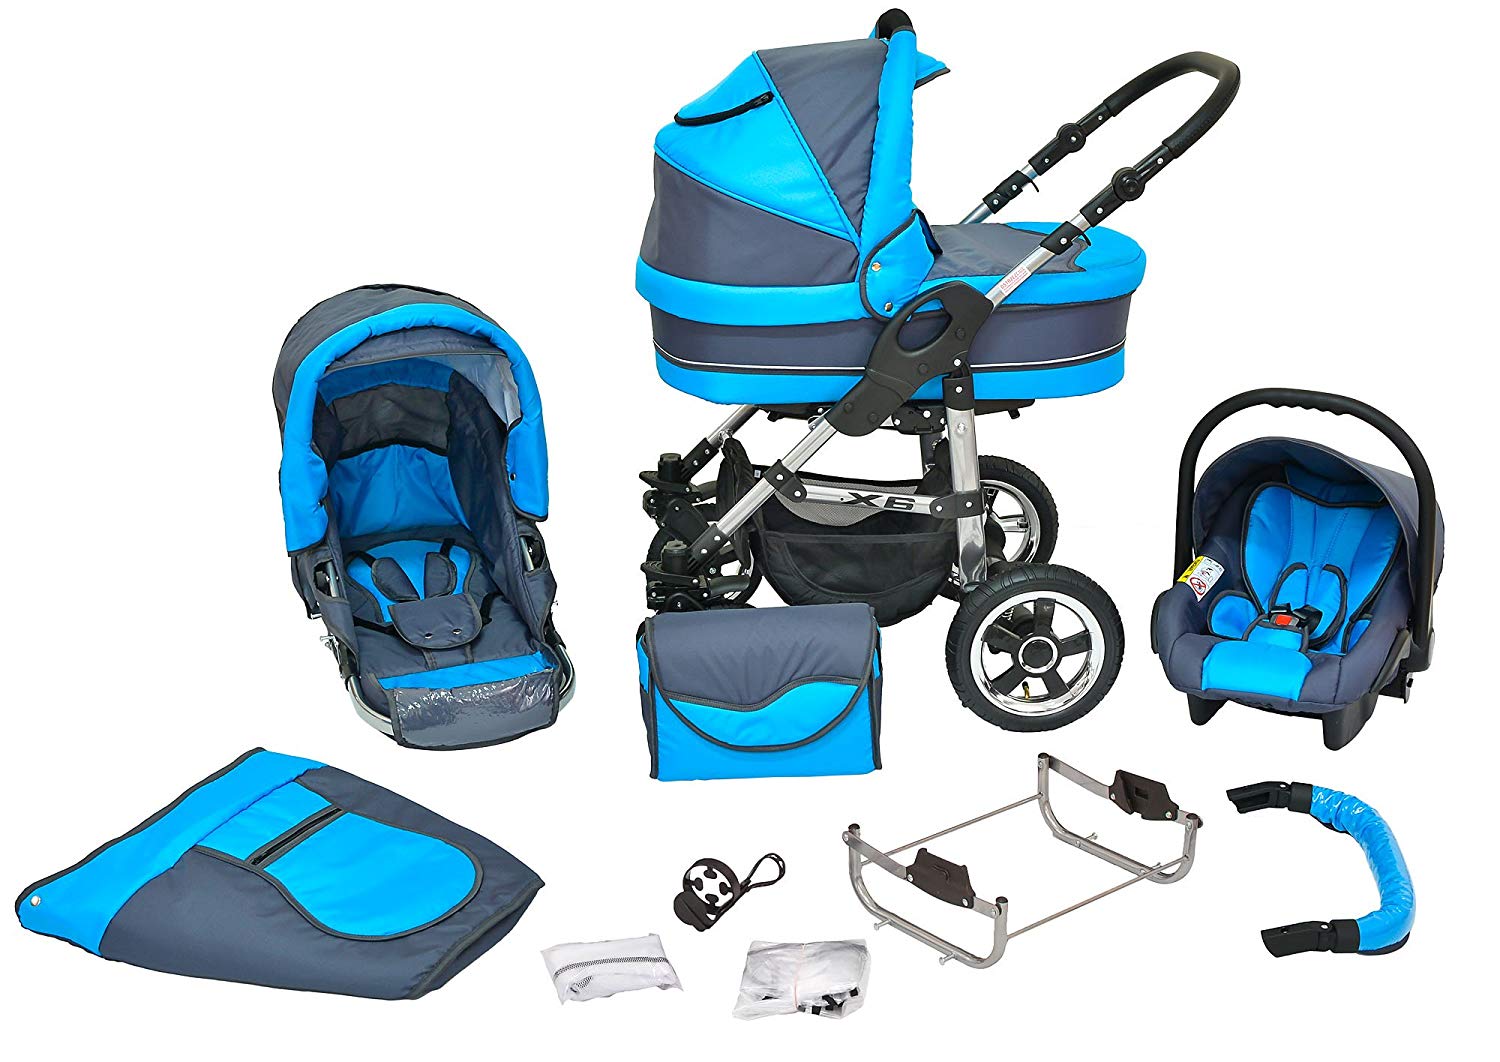 Combi Pushchair X6 – 3 in 1 Combi Pushchair Buggy Graphite/Turquoise